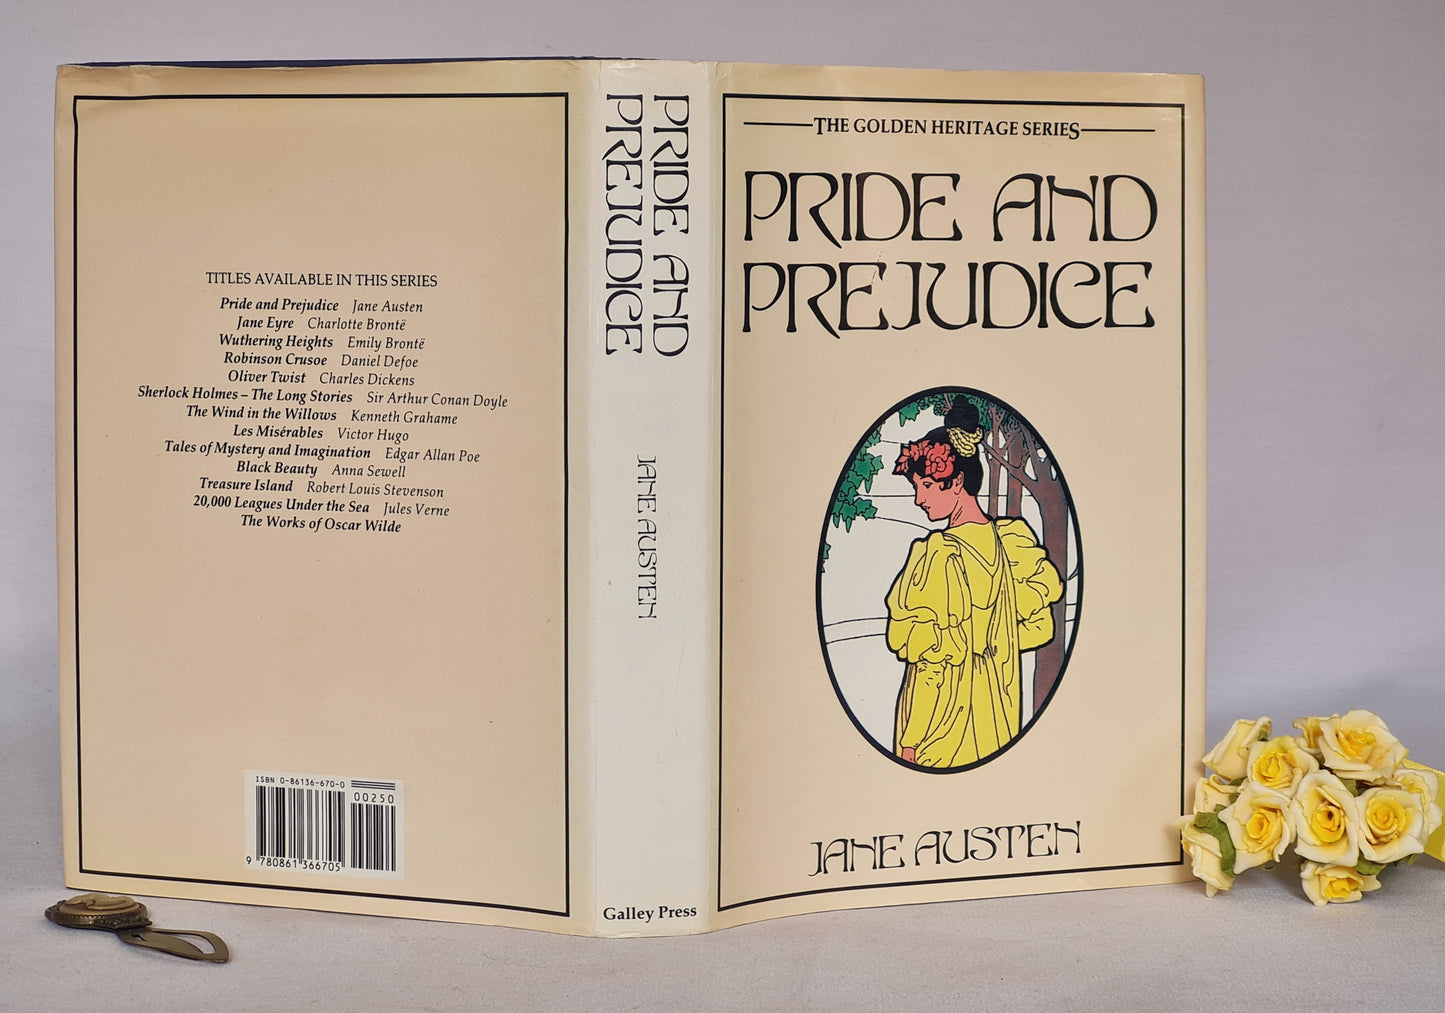 1987 Pride and Prejudice by Jane Austen / Galley Press, London / Vintage Hardback / With Dust Jacket / Good Condition